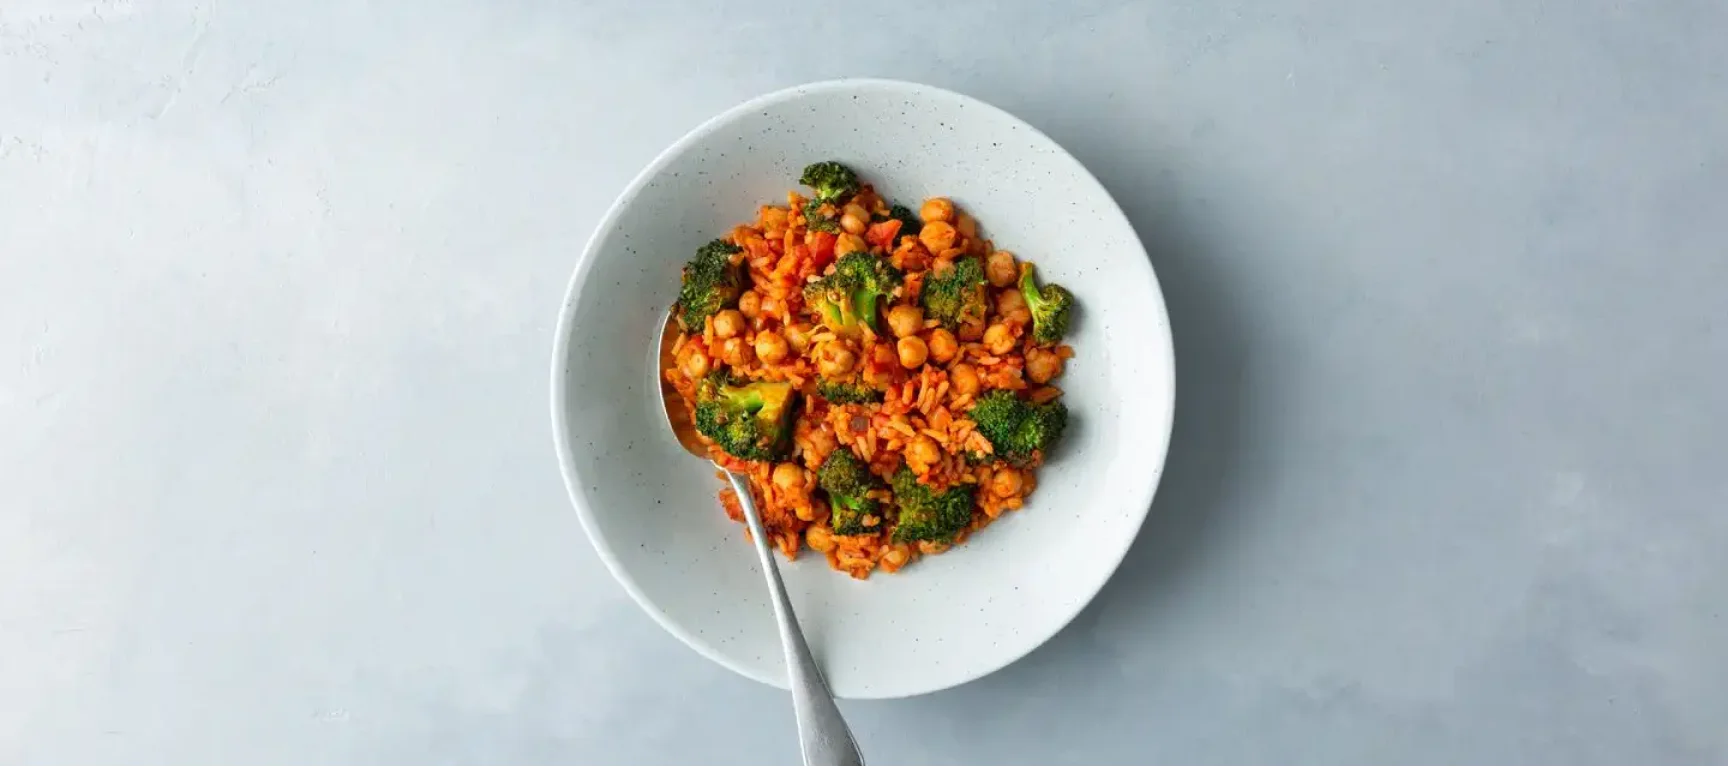 Tomato and broccoli stew with rice and chickpeas